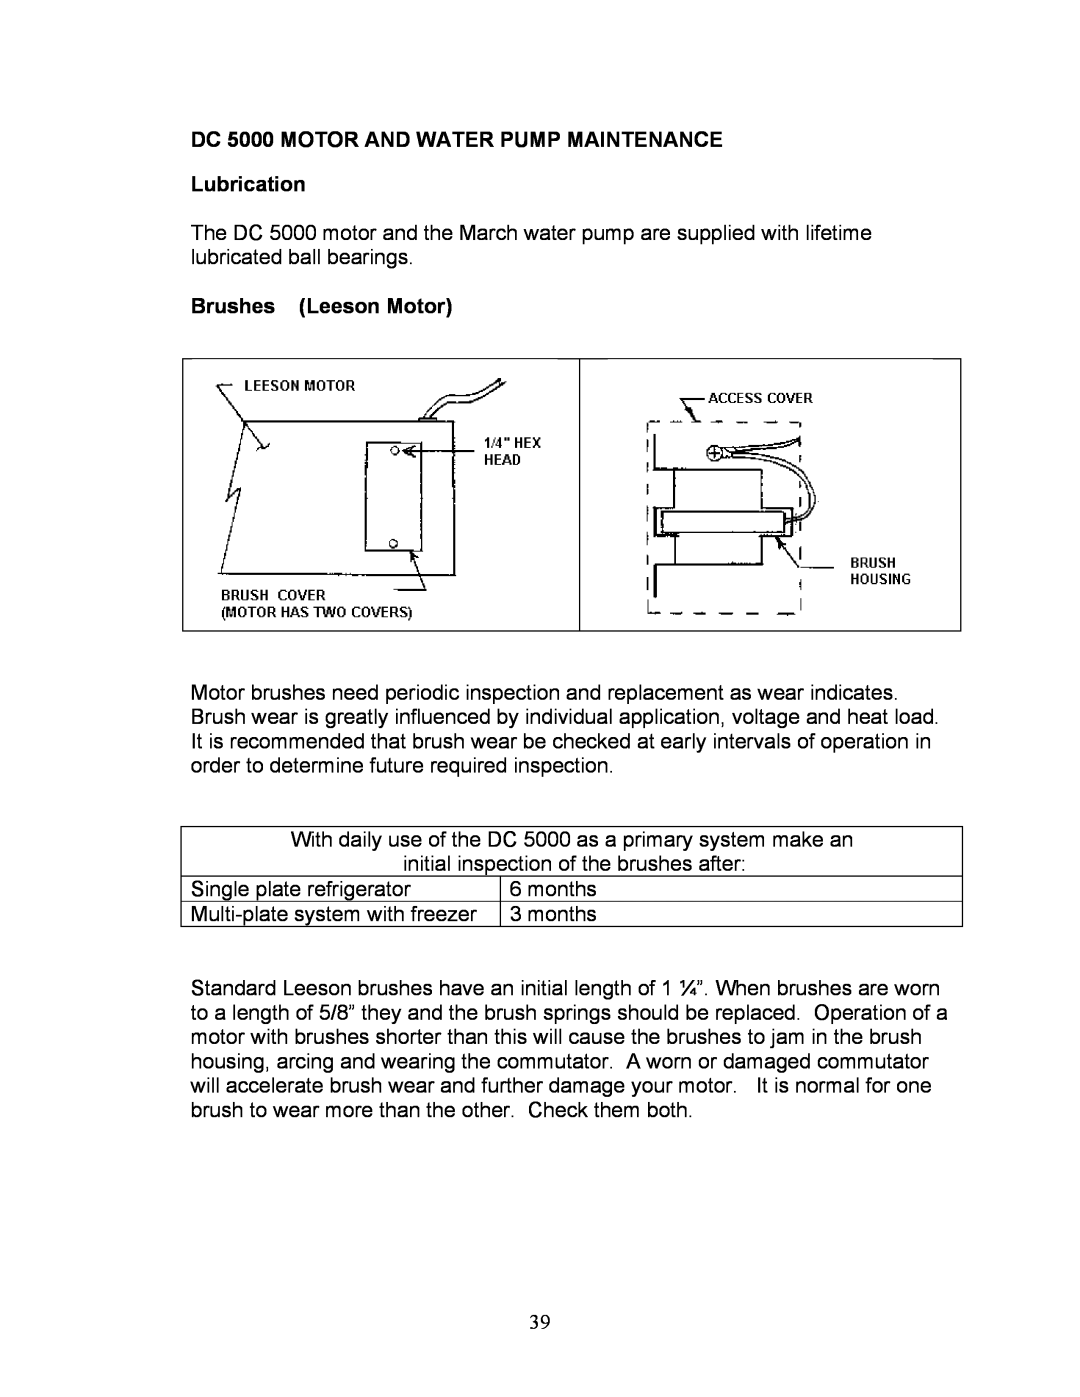 Sea Frost installation instructions DC 5000 MOTOR AND WATER PUMP MAINTENANCE, Lubrication, Brushes Leeson Motor 